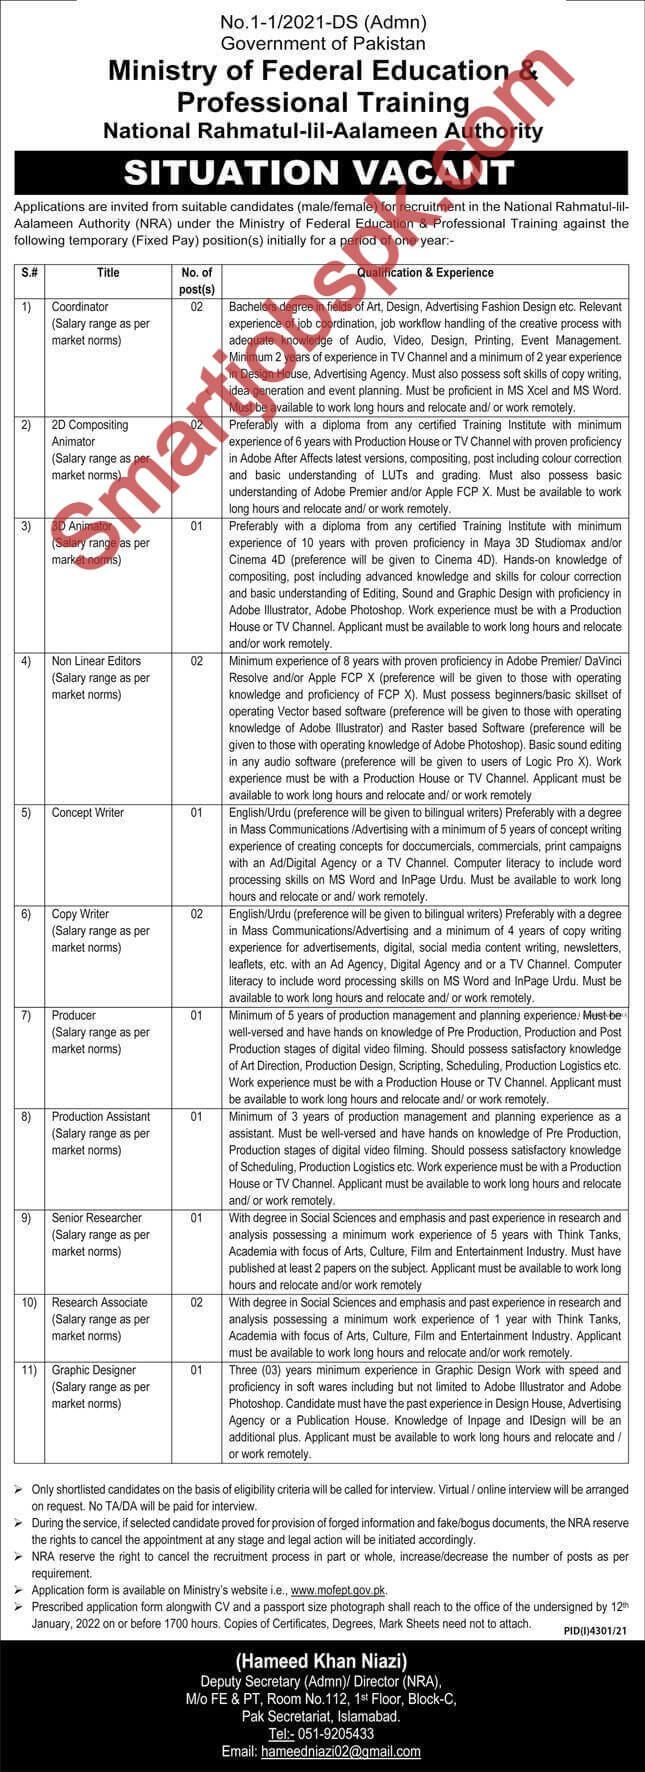 Ministry of Federal Education Islamabad Jobs 2022 - Jobs in Pakistan 2022